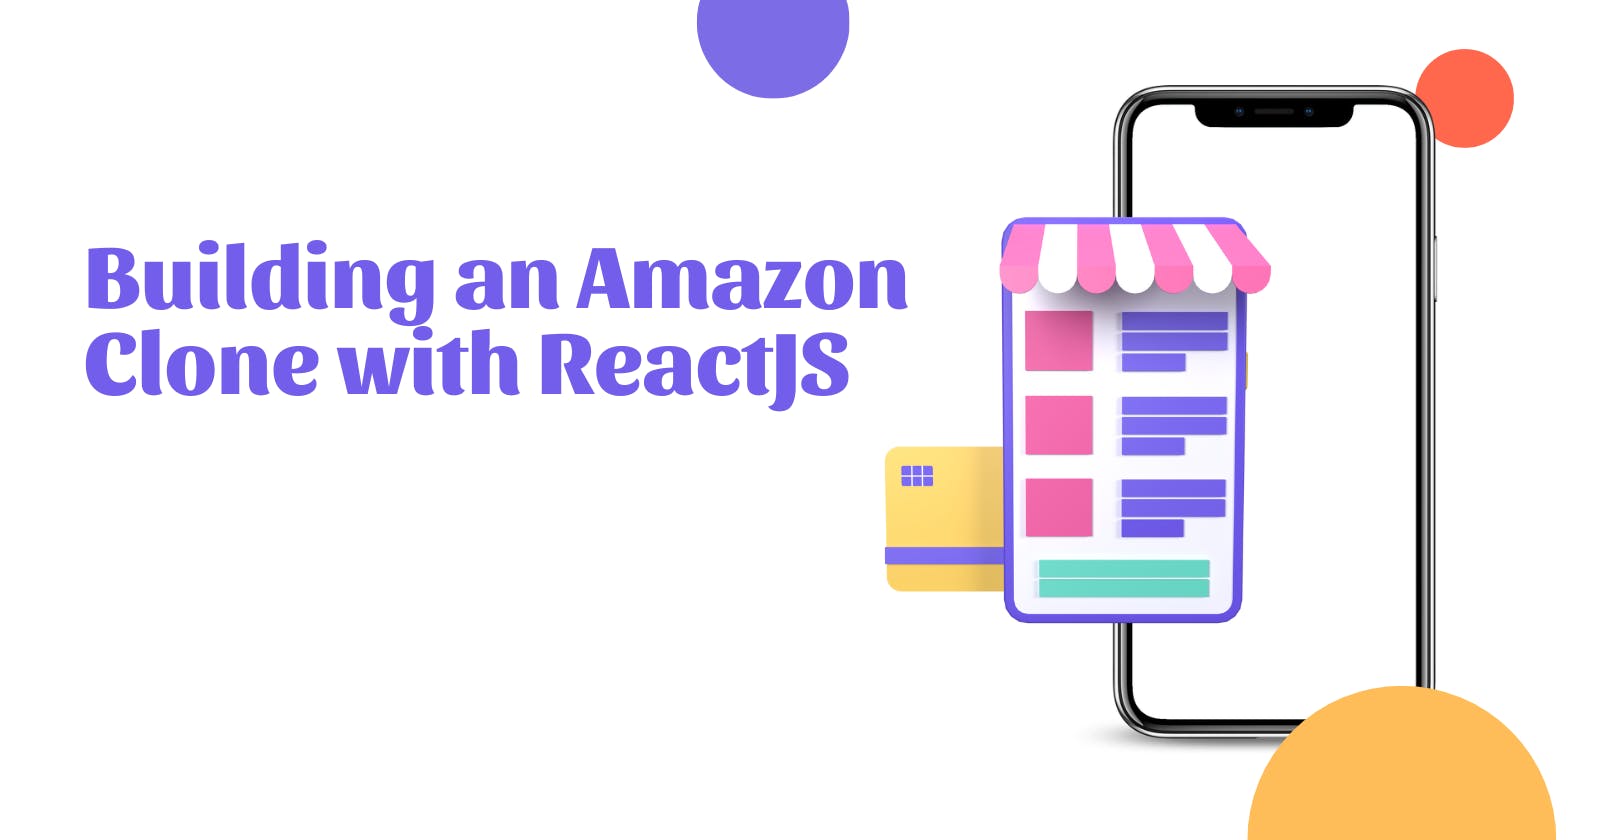 Step-by-Step Guide to Building an Amazon Clone with ReactJS